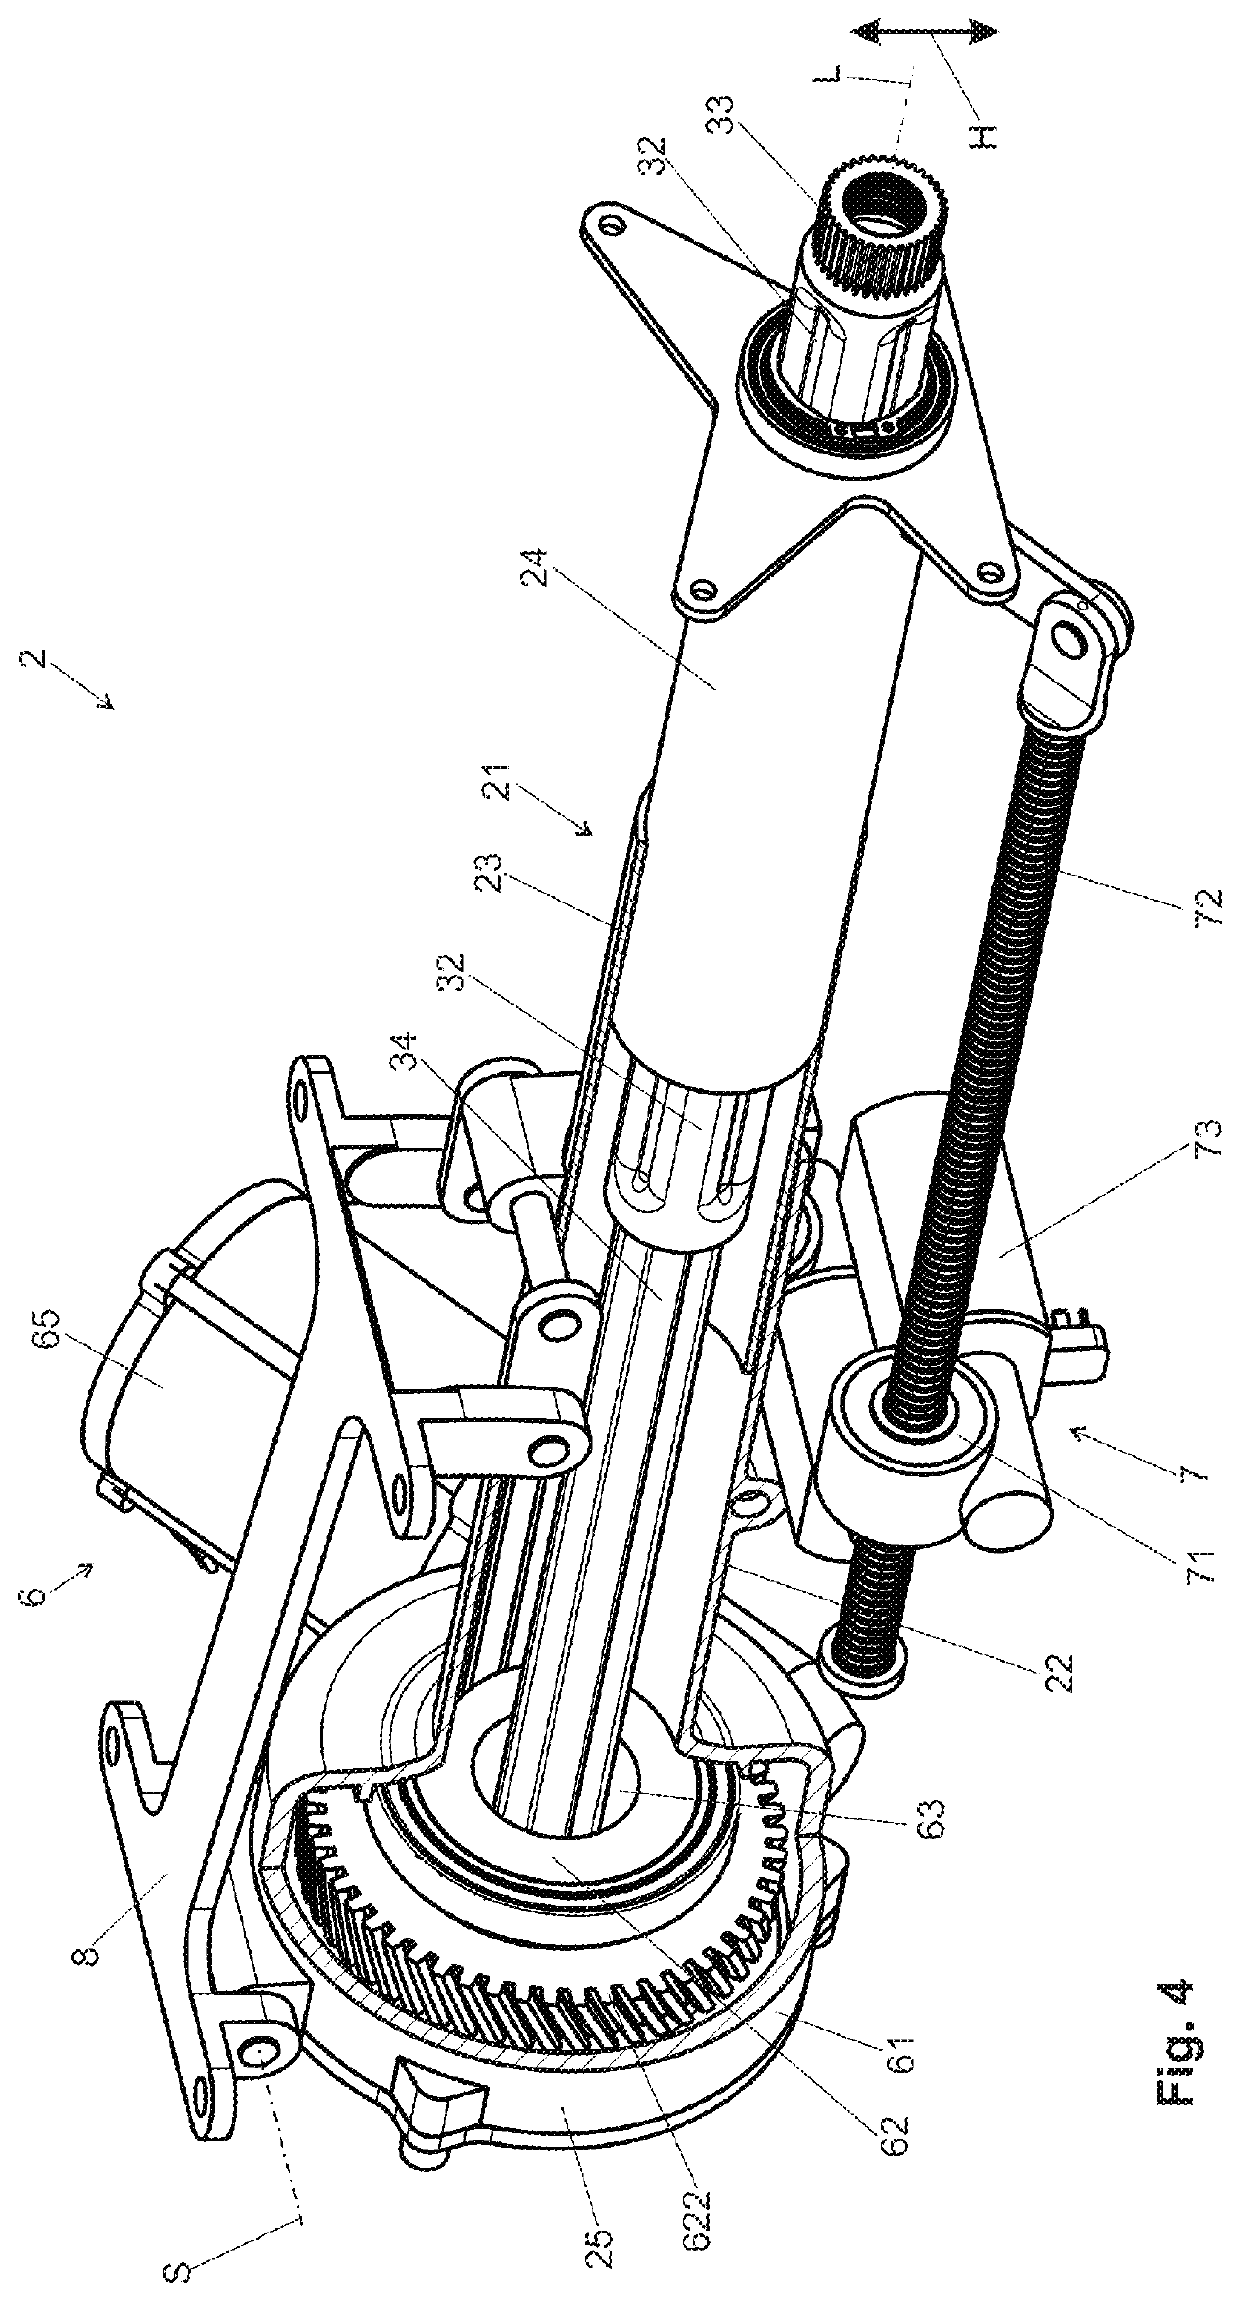 Steering column for a steer-by-wire steering system for a motor vehicle